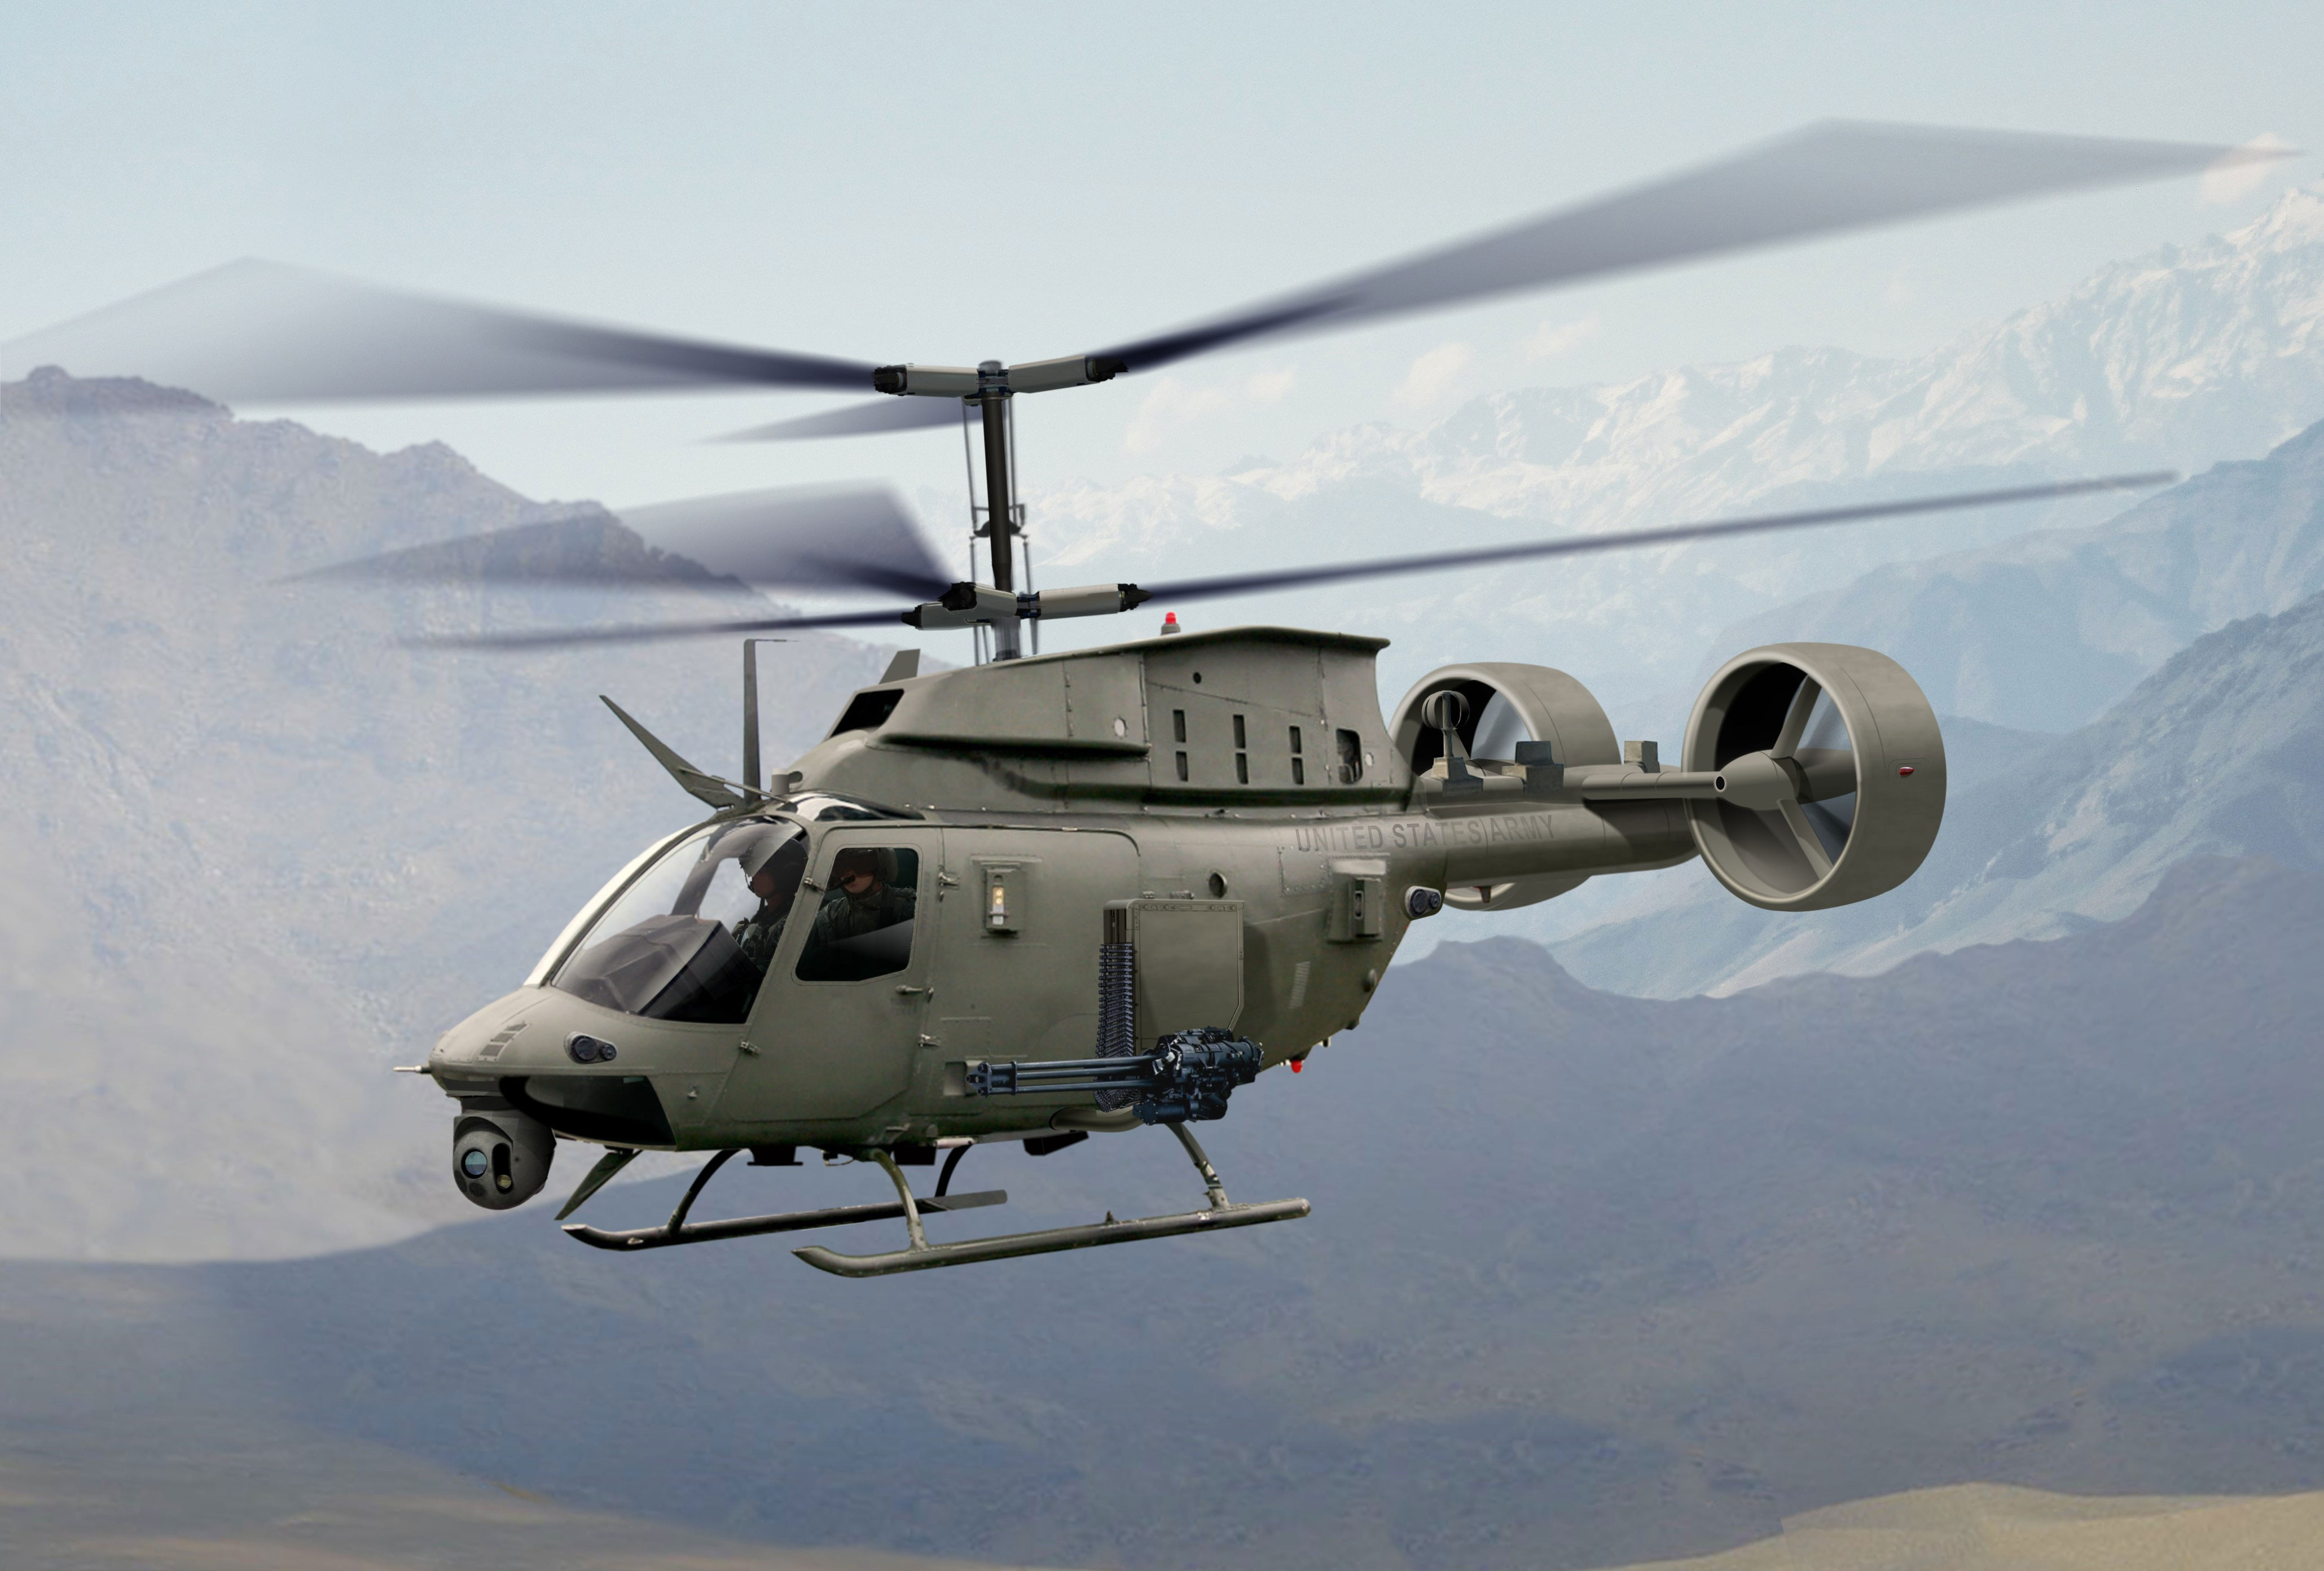 K helicopter papers background images